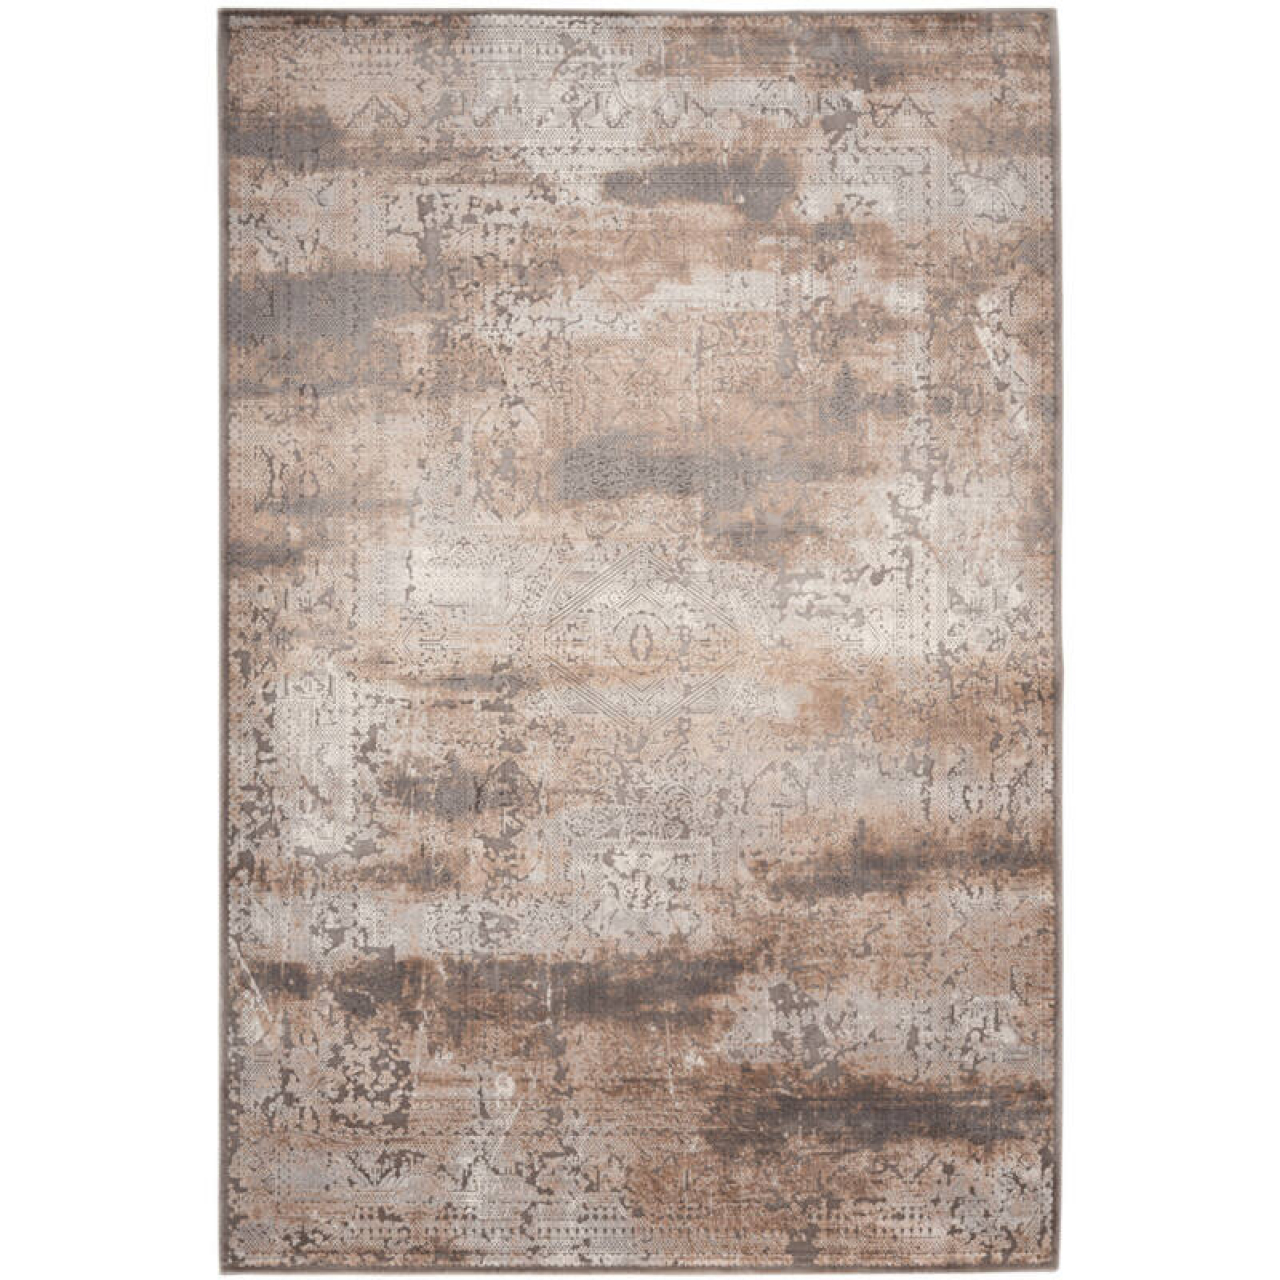 Obsession Haute Couture Jewel 950 Taupe szőnyeg-120x170